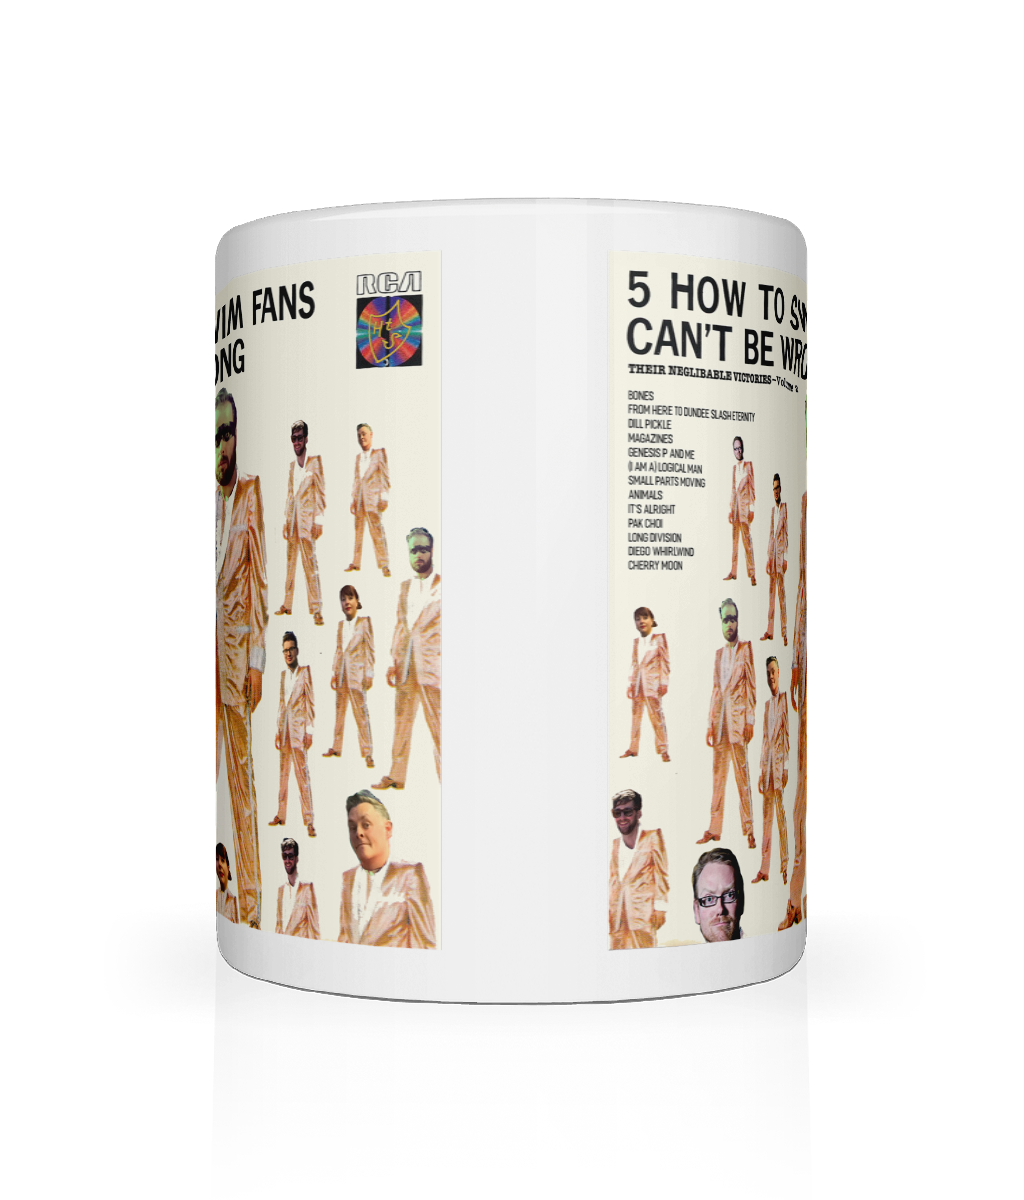 5 How To Swim Fans Can't Be Wrong Mug